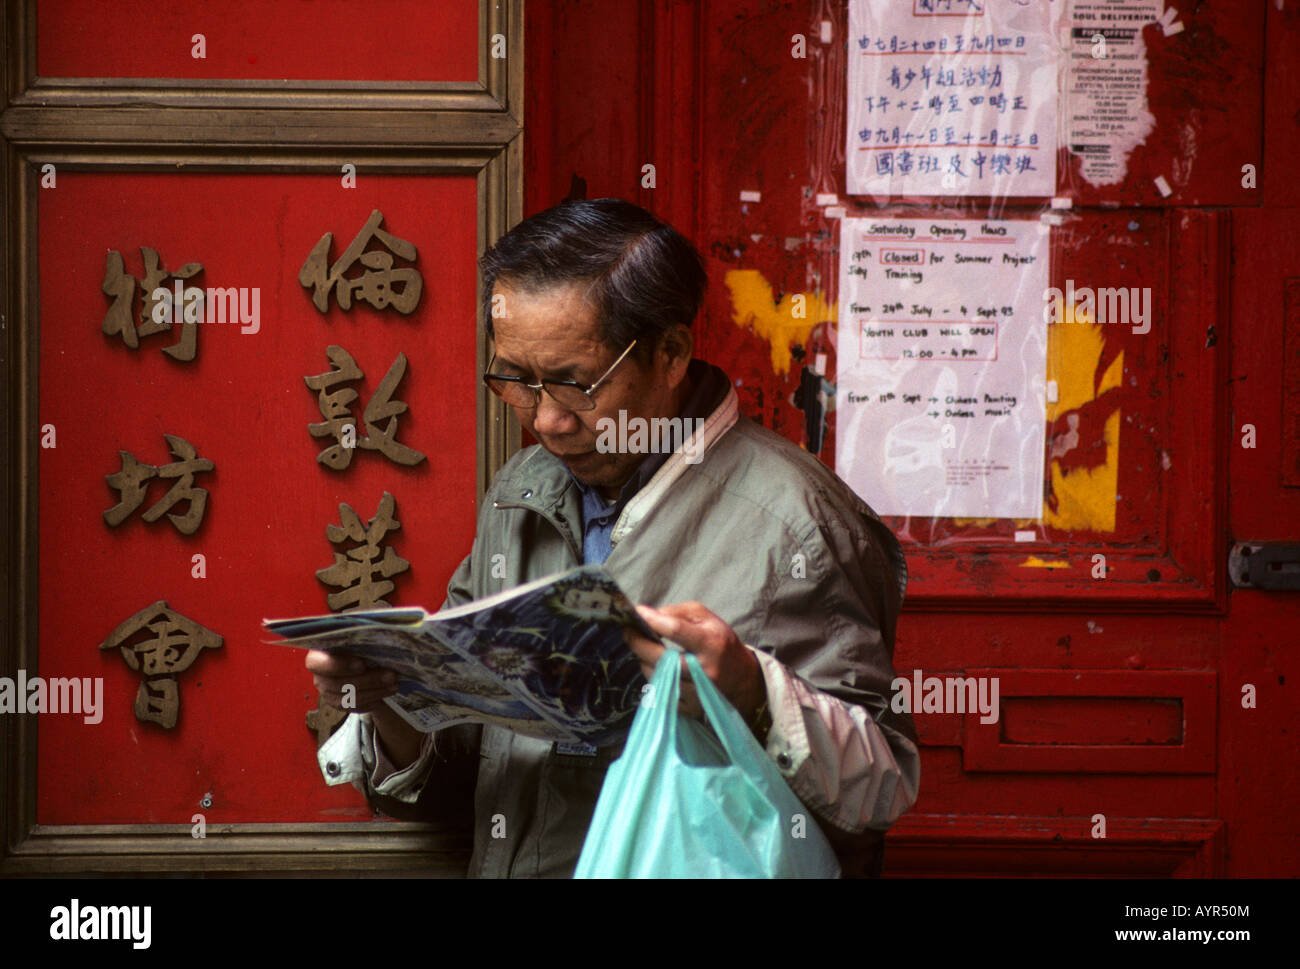 Chinese man reading a comic book in Chinatown, Soho, London, England, UK Stock Photo